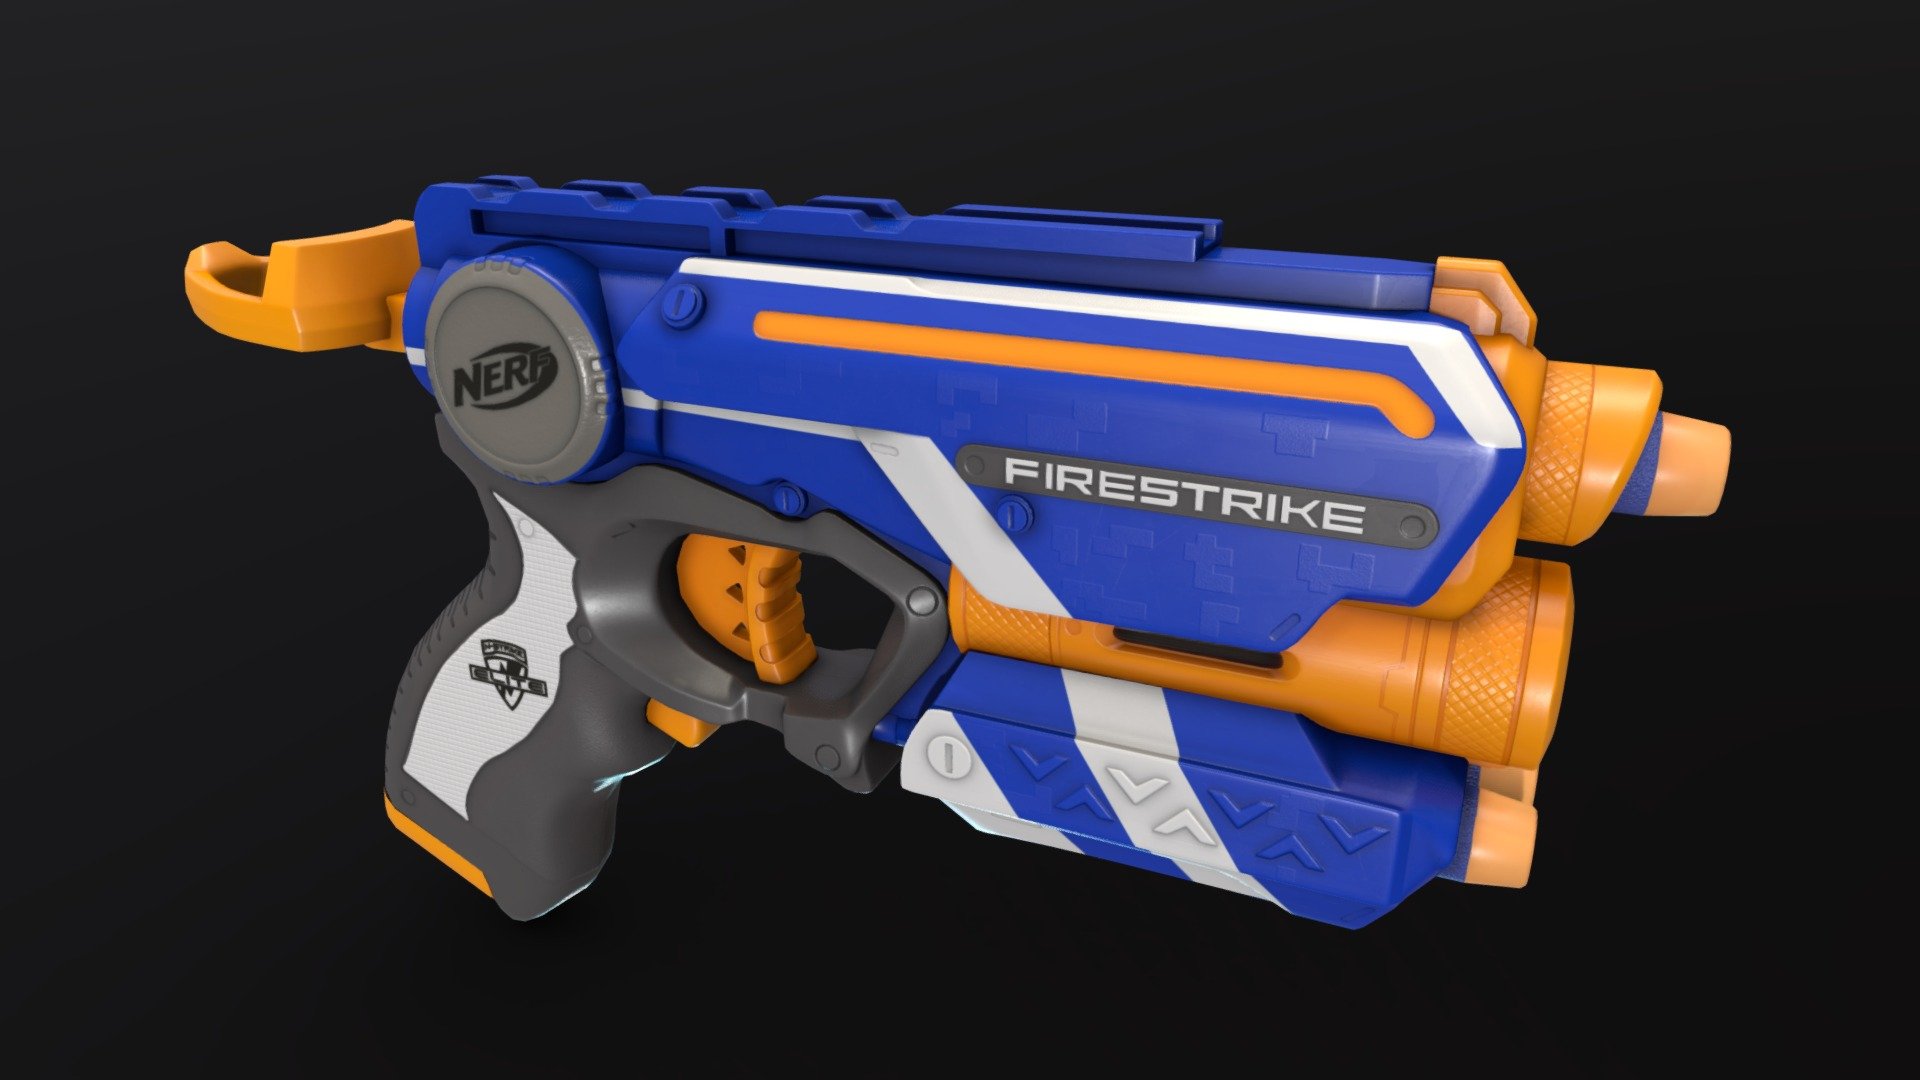 Comissioned by a friend for their meme avatar. Based off the Nerf pistol. Was a fun little gun to make 3d model